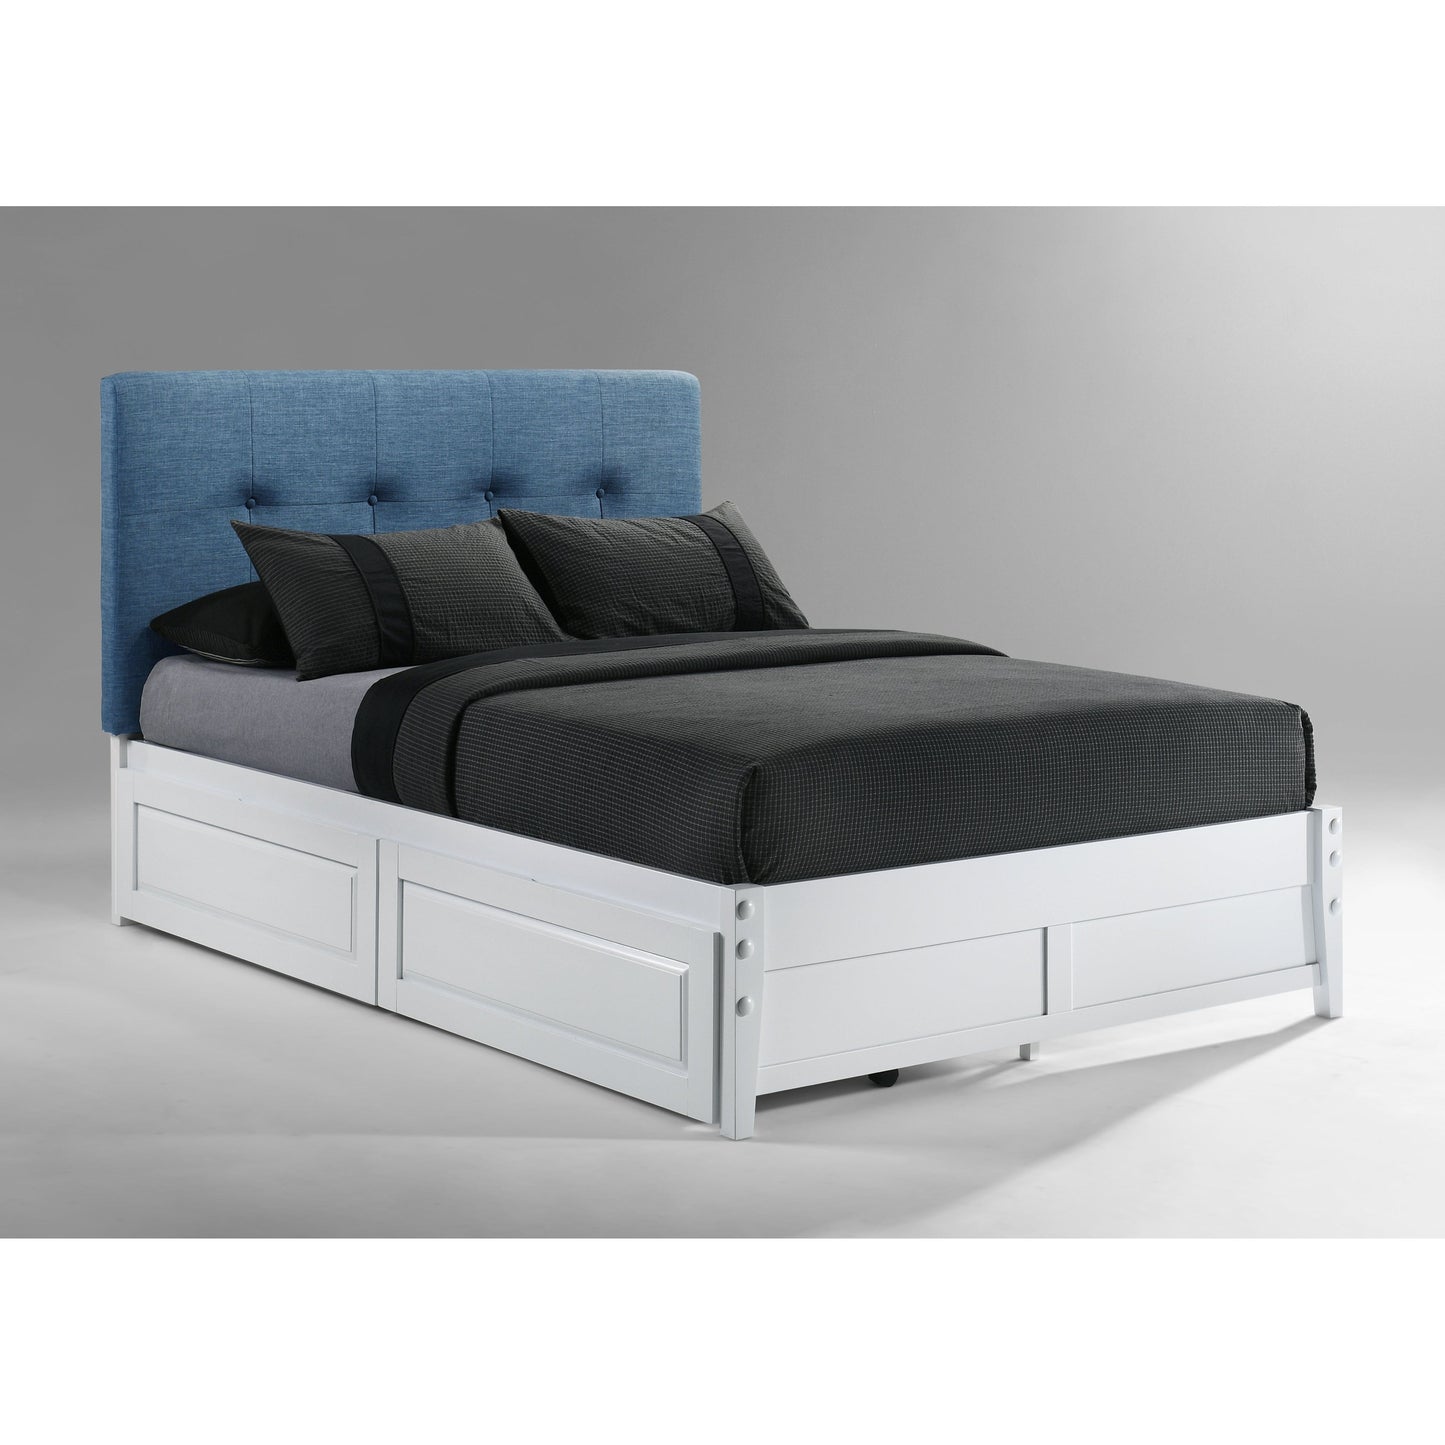 The Bedroom Emporium Paprika Twin Bed in Teal with White Finish Frame (K Series)